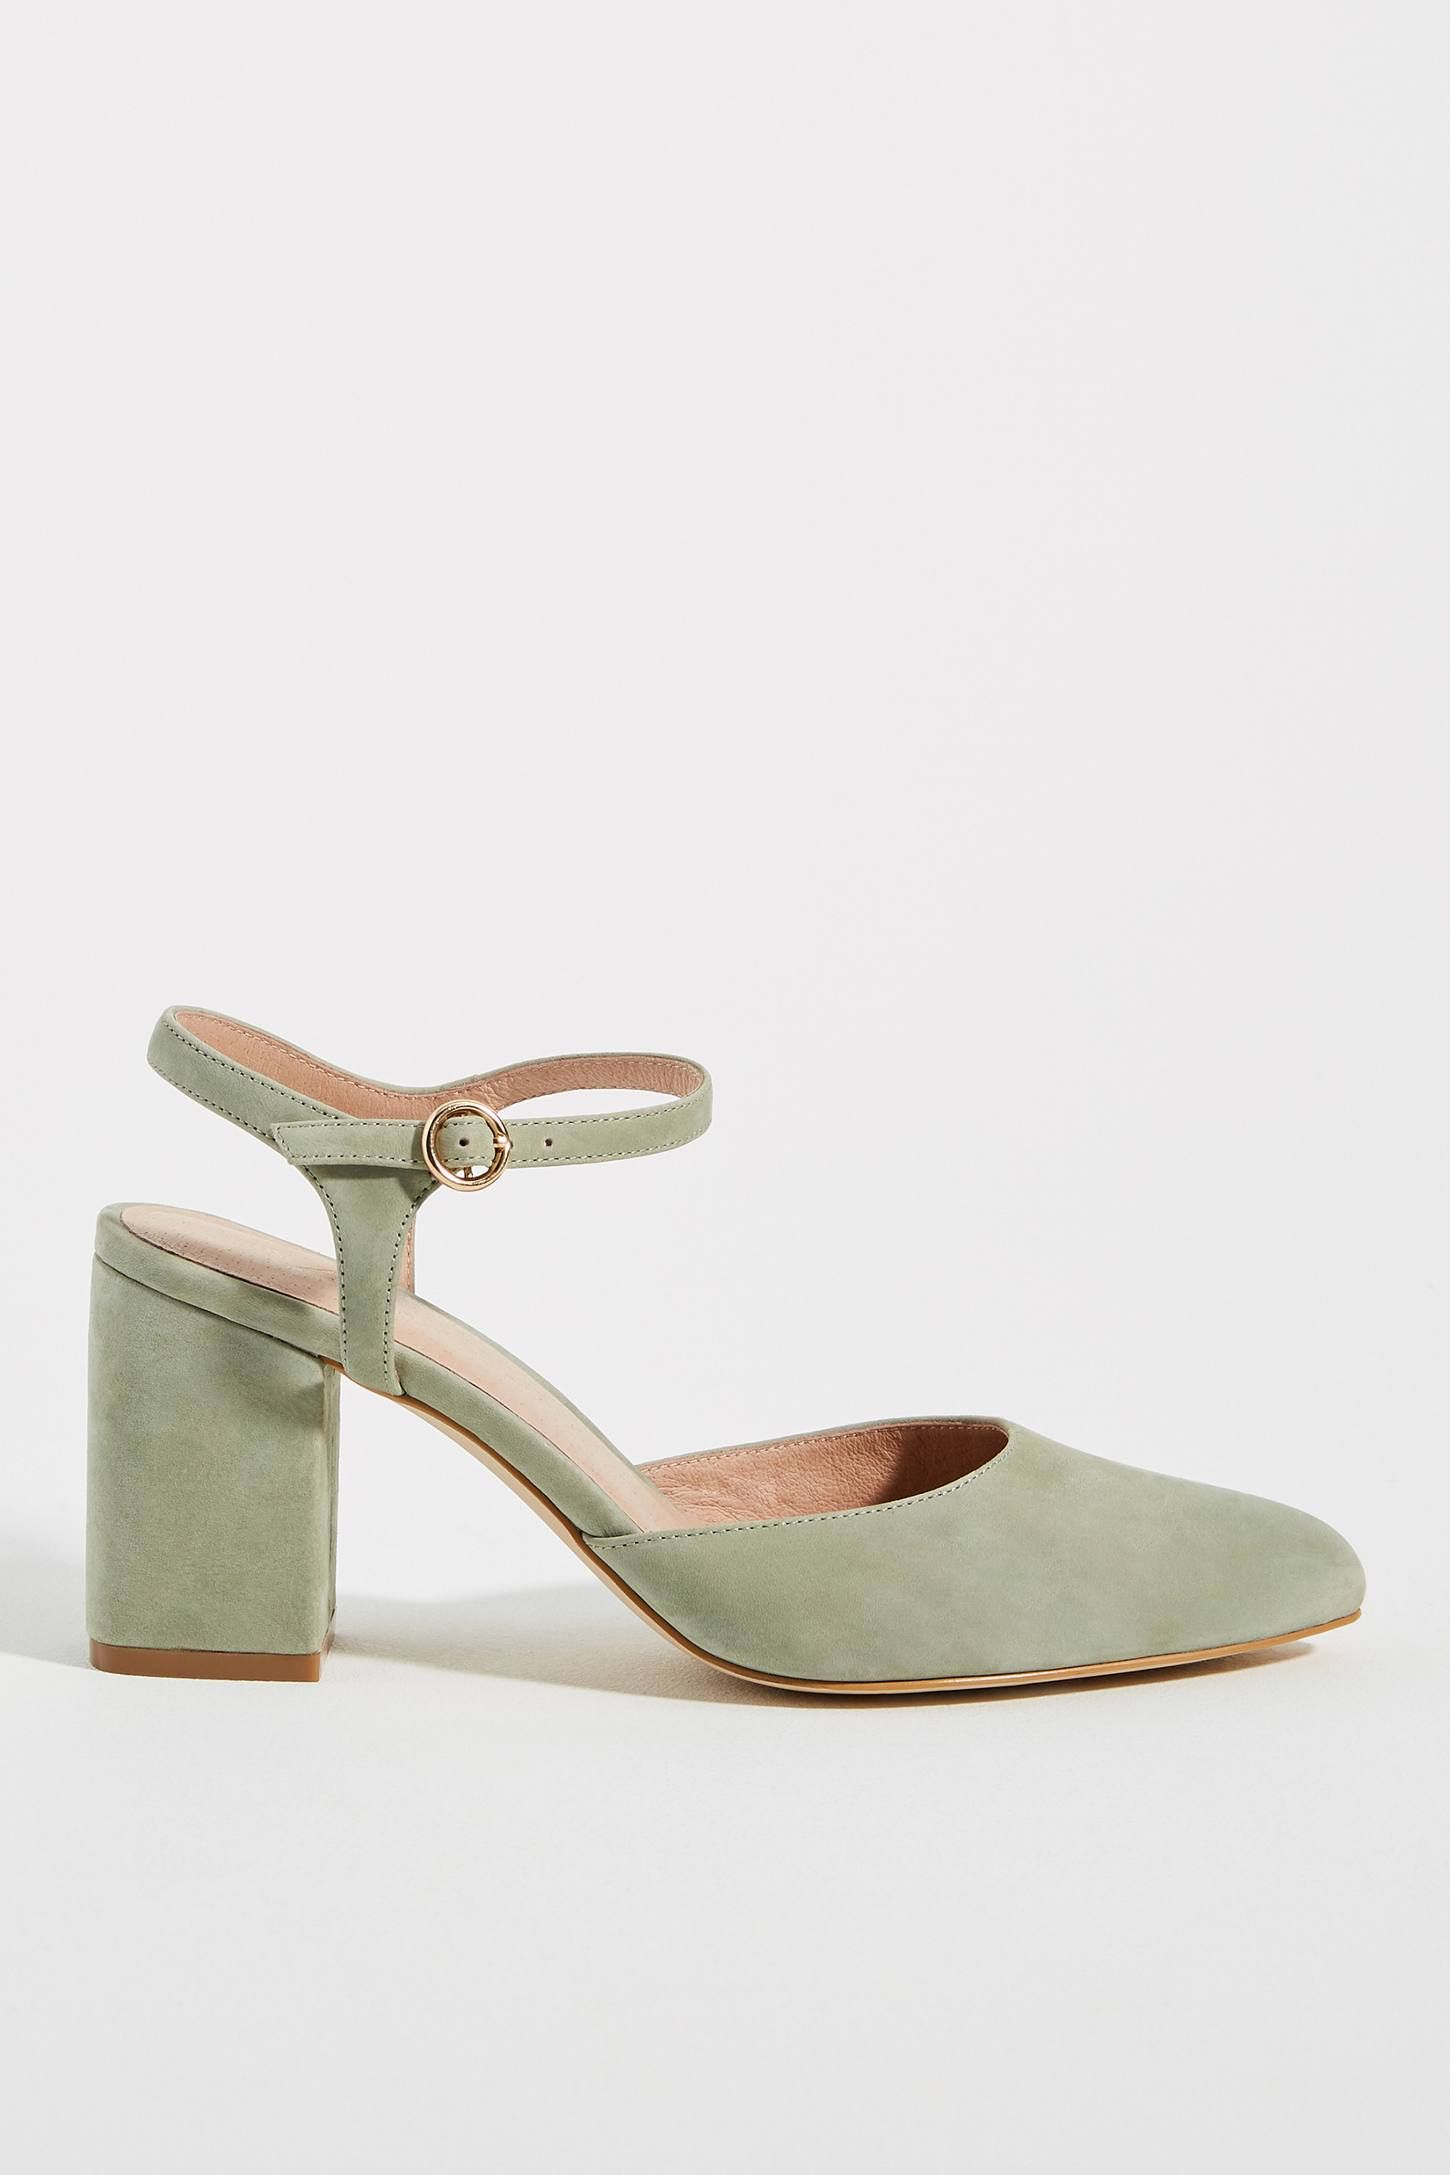 anthropologie sale shoes